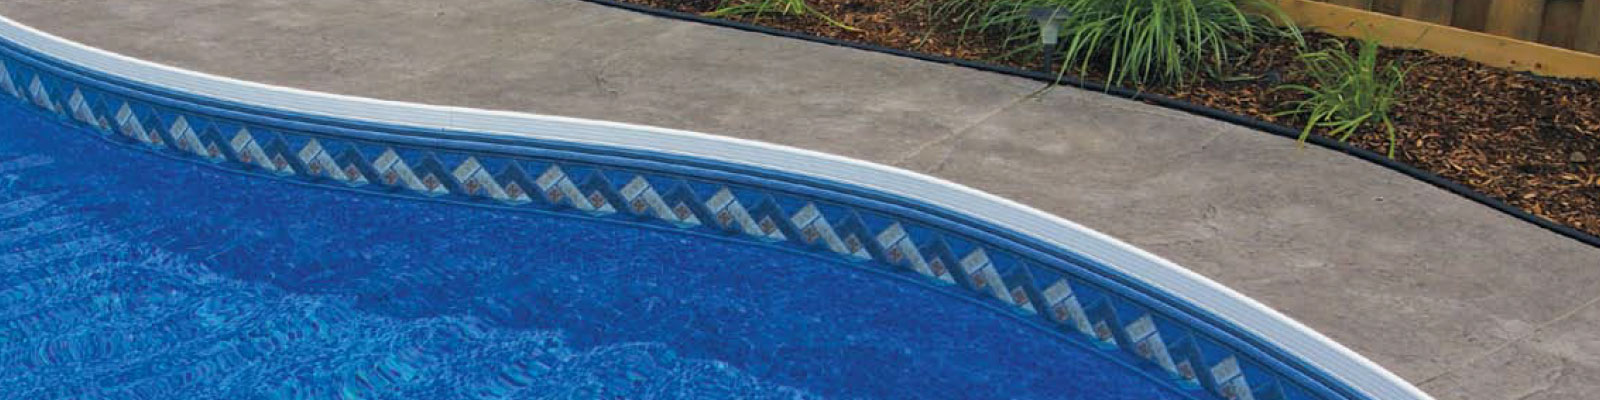 In-Ground Pool Liners in Grand Rapids and Holland MI at Zagers Pool and Spa